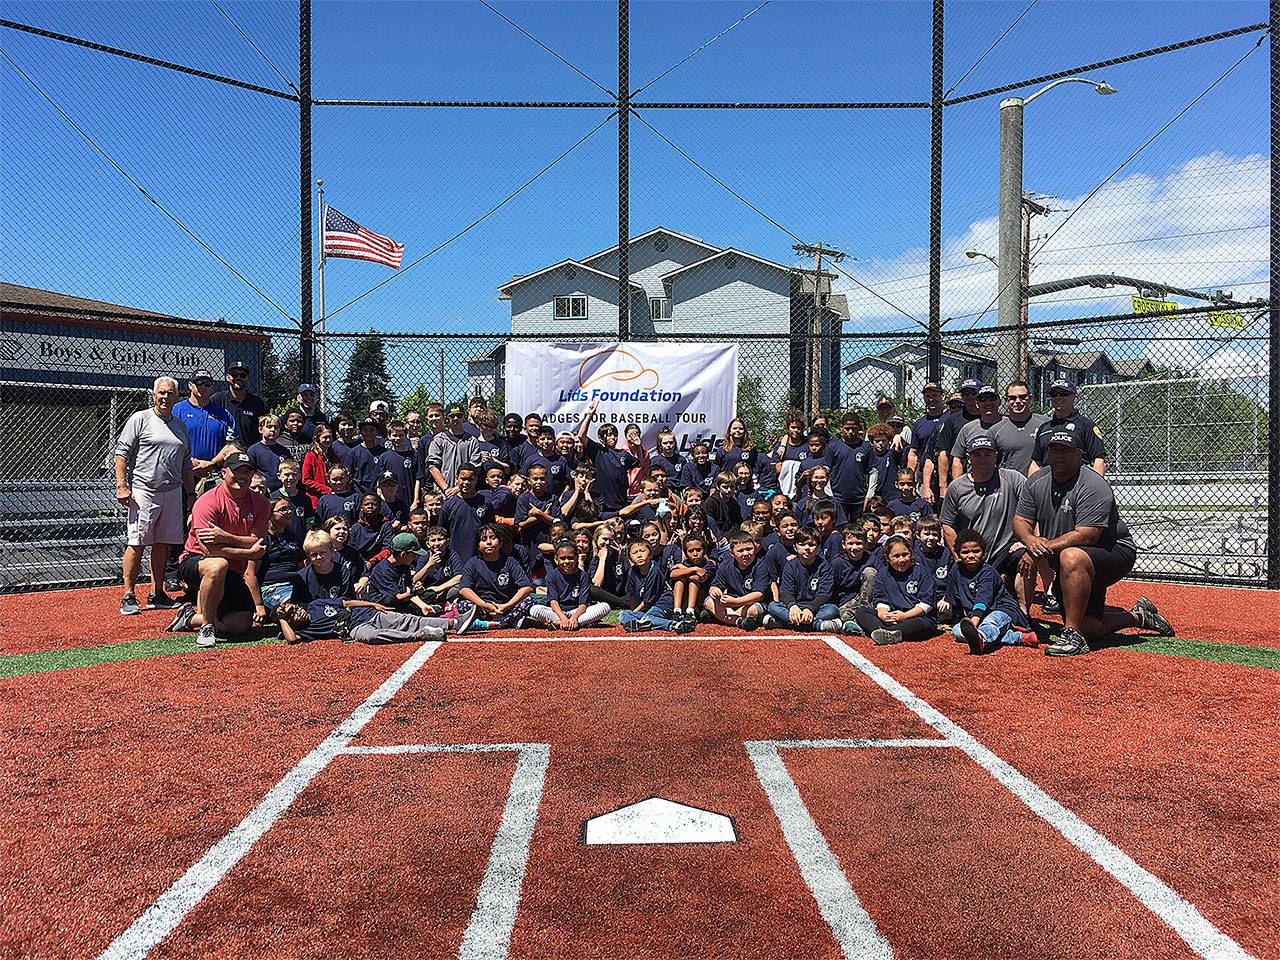 The Cal Ripken Sr. Foundation and LIDS Foundation teamed up with country music recording artist and Ripken Foundation advocate Matt Stillwell, in partnership with Everett Police Department and the Seattle Mariners, to host a LIDS Badges for Baseball clinic on July 2 with more than 125 youth from the Boys & Girls Club of Snohomish County. (Contributed photo)